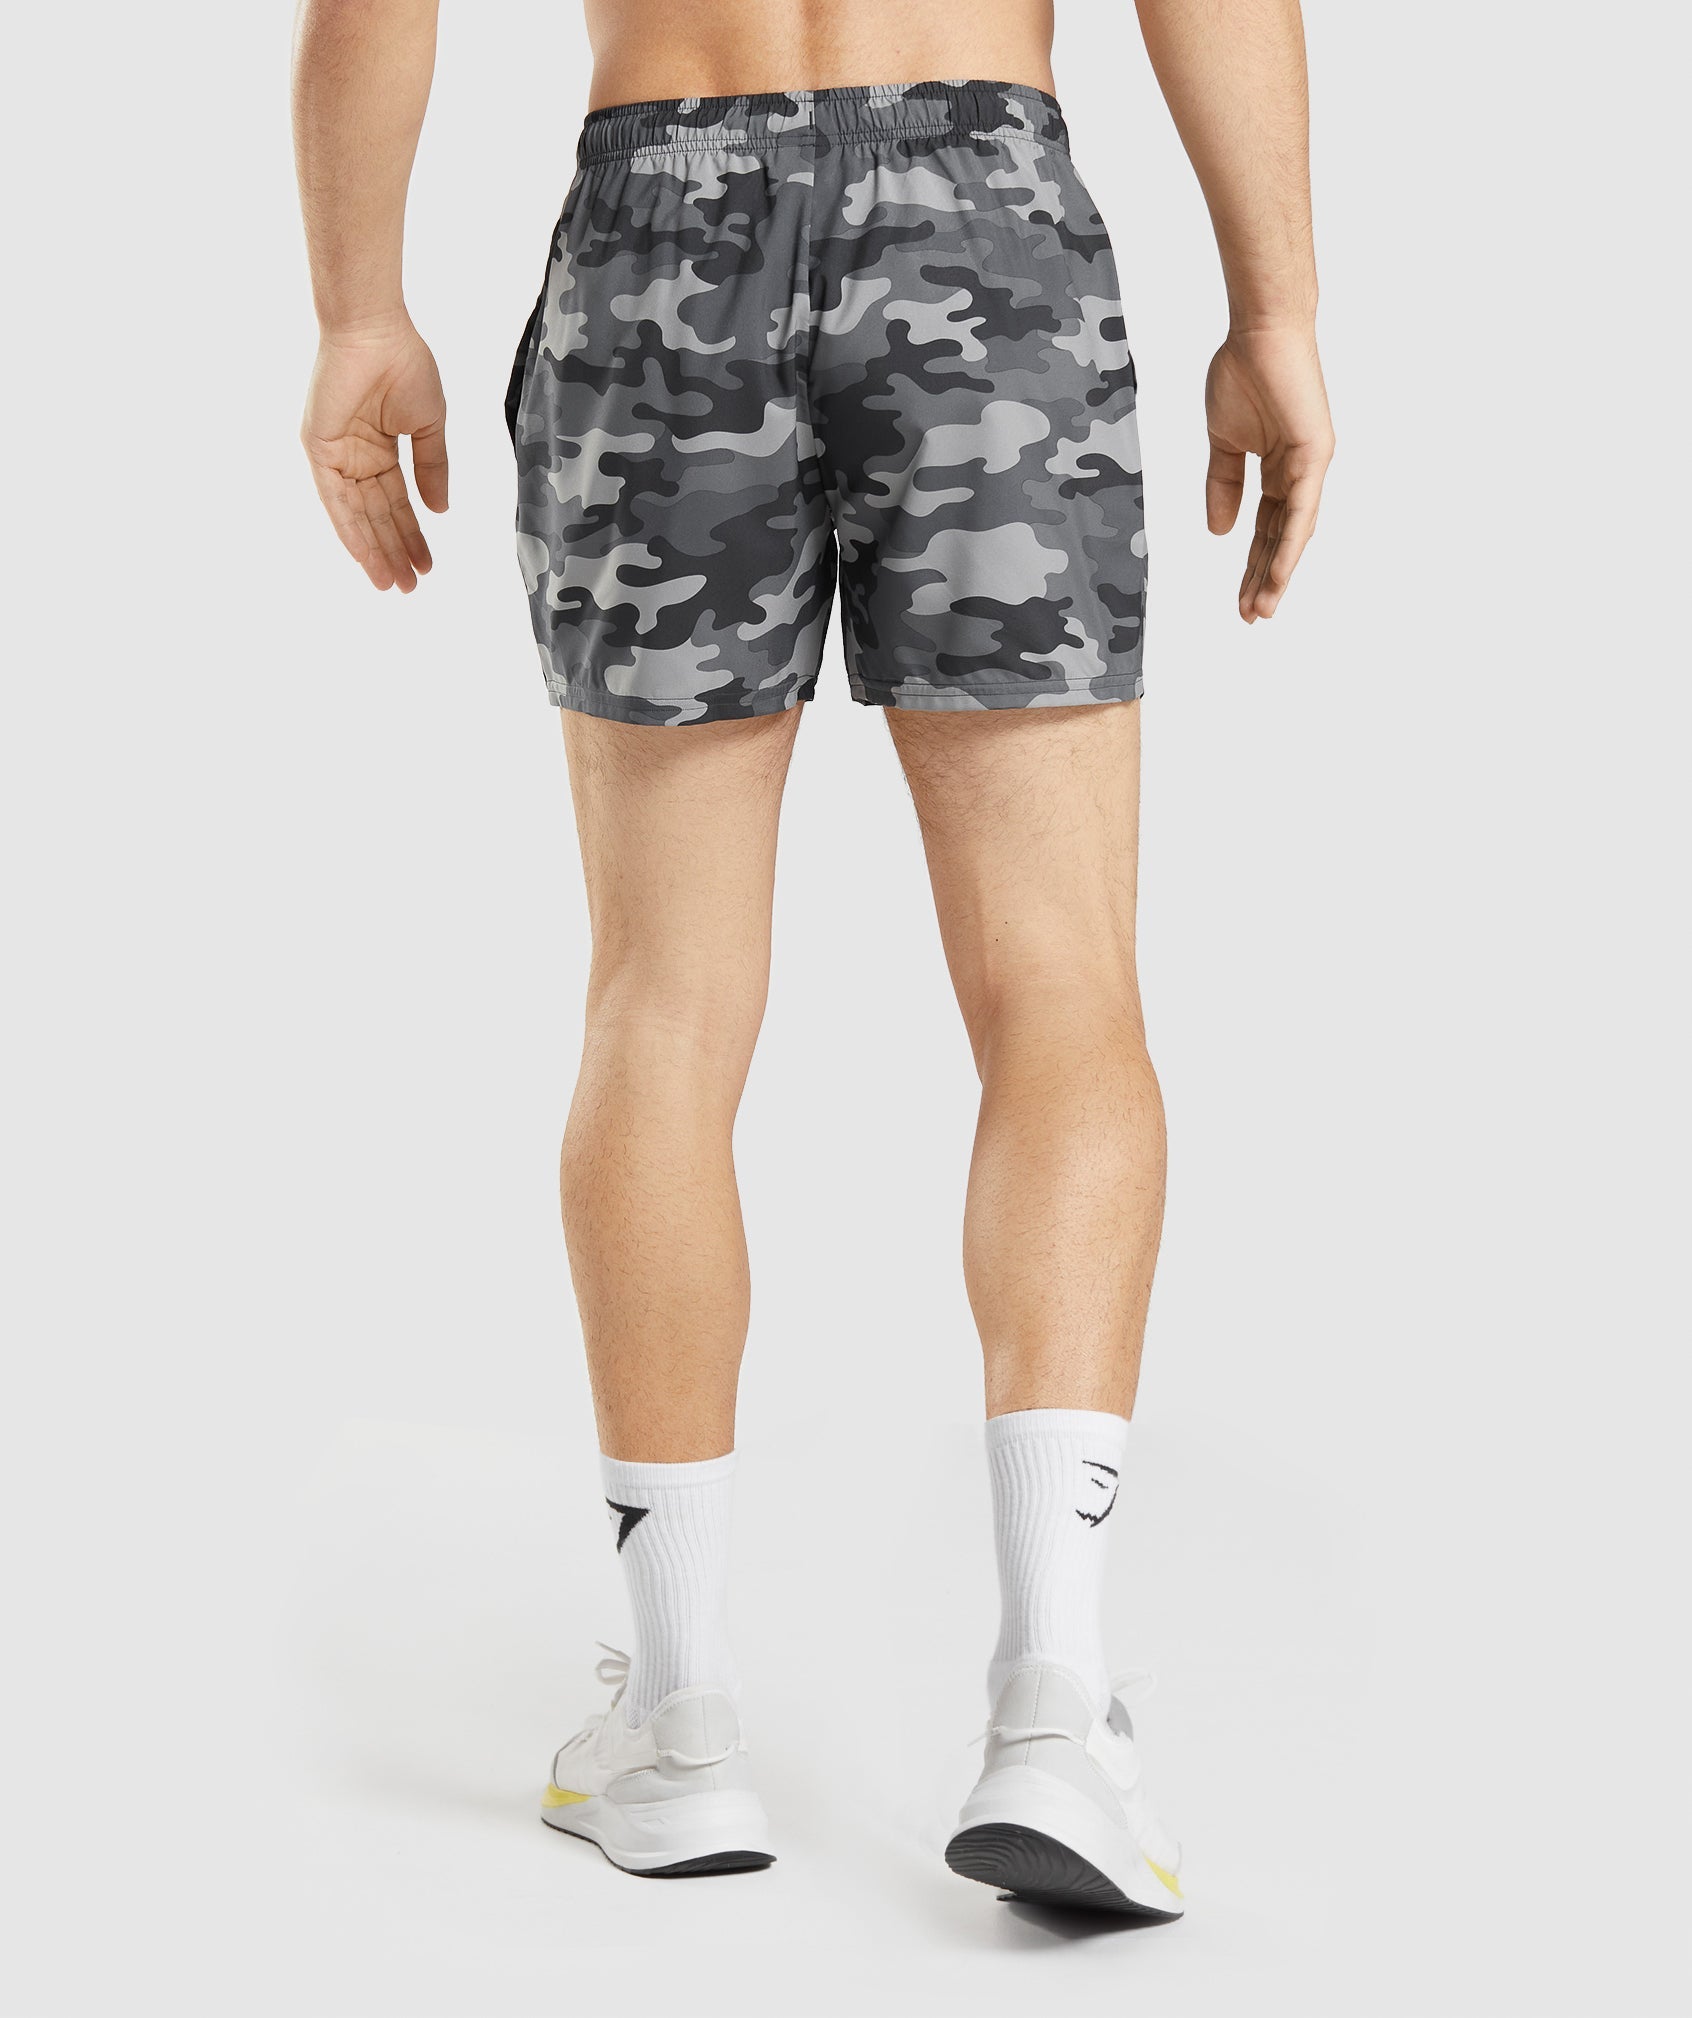 Arrival 5" Shorts in Grey Print - view 2